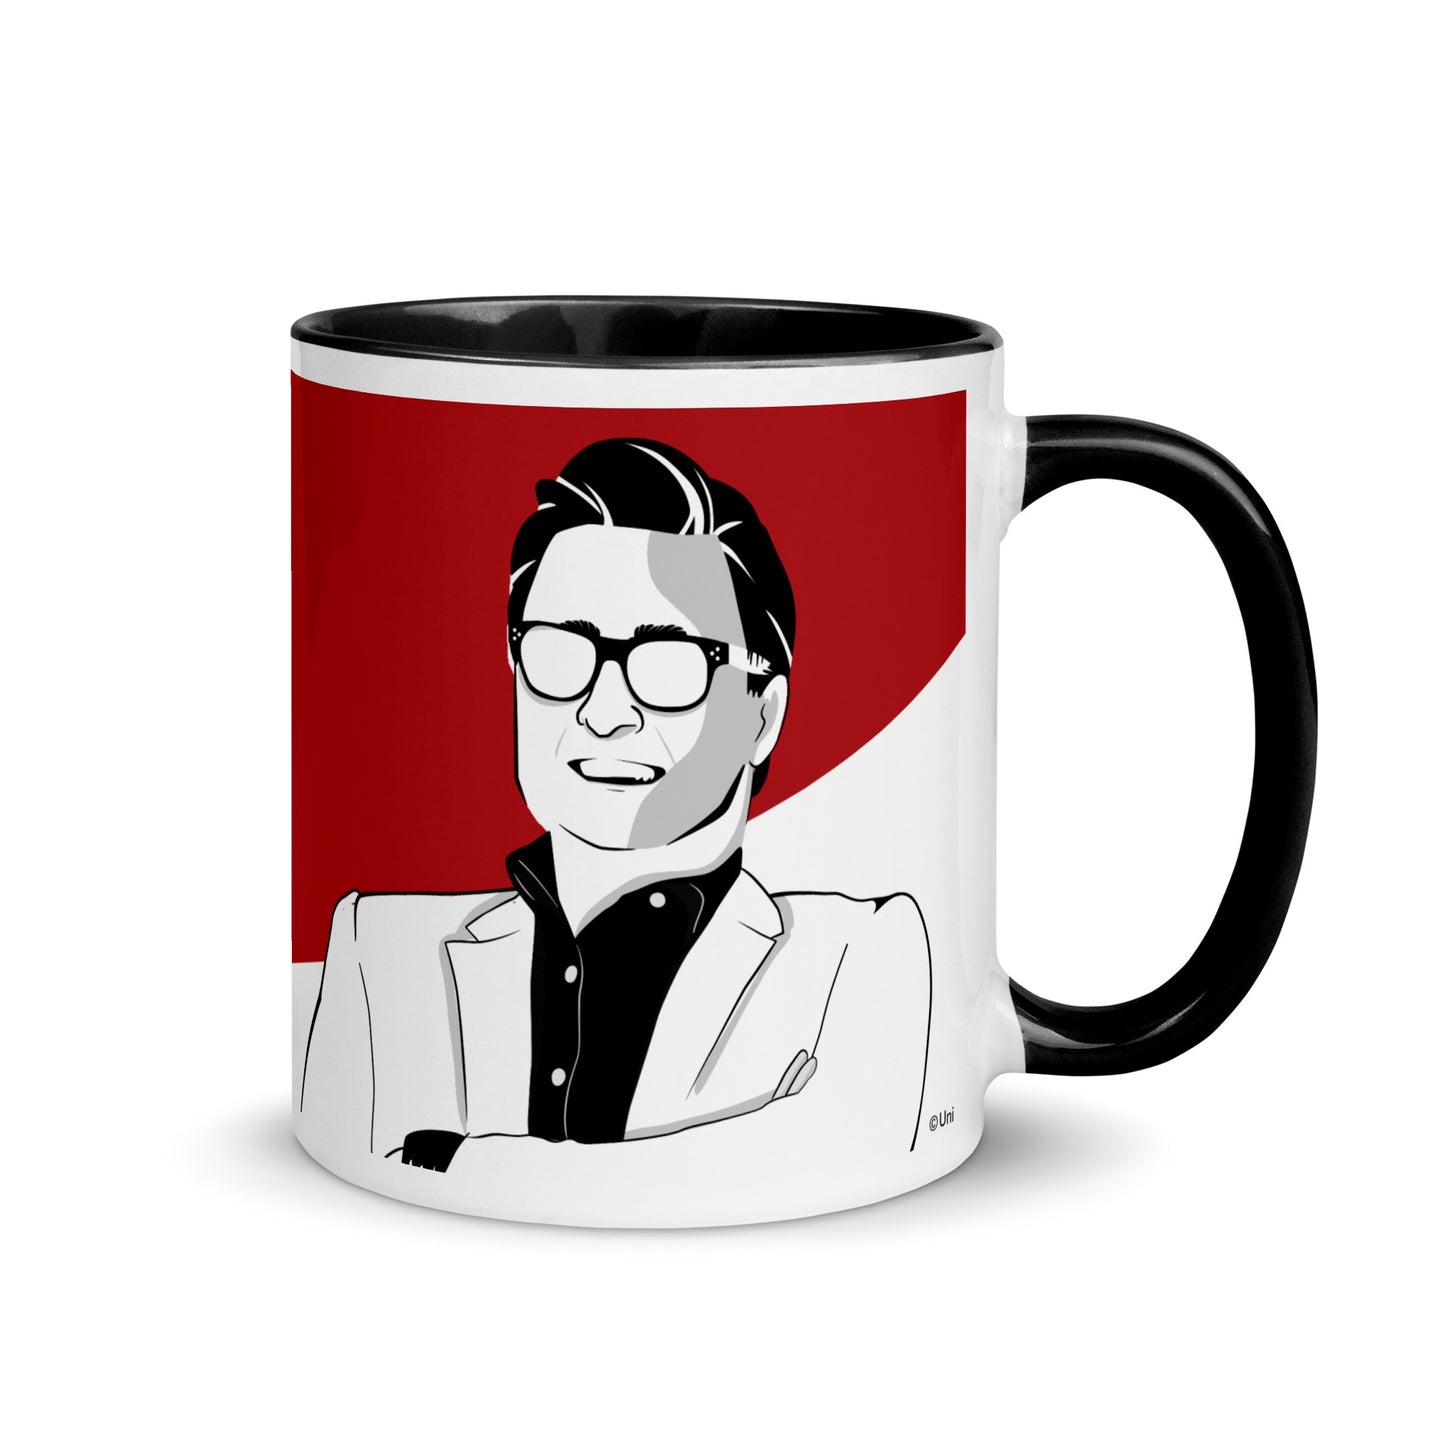 Why Is This Happening? The Chris Hayes Podcast Grey Key Black Mug